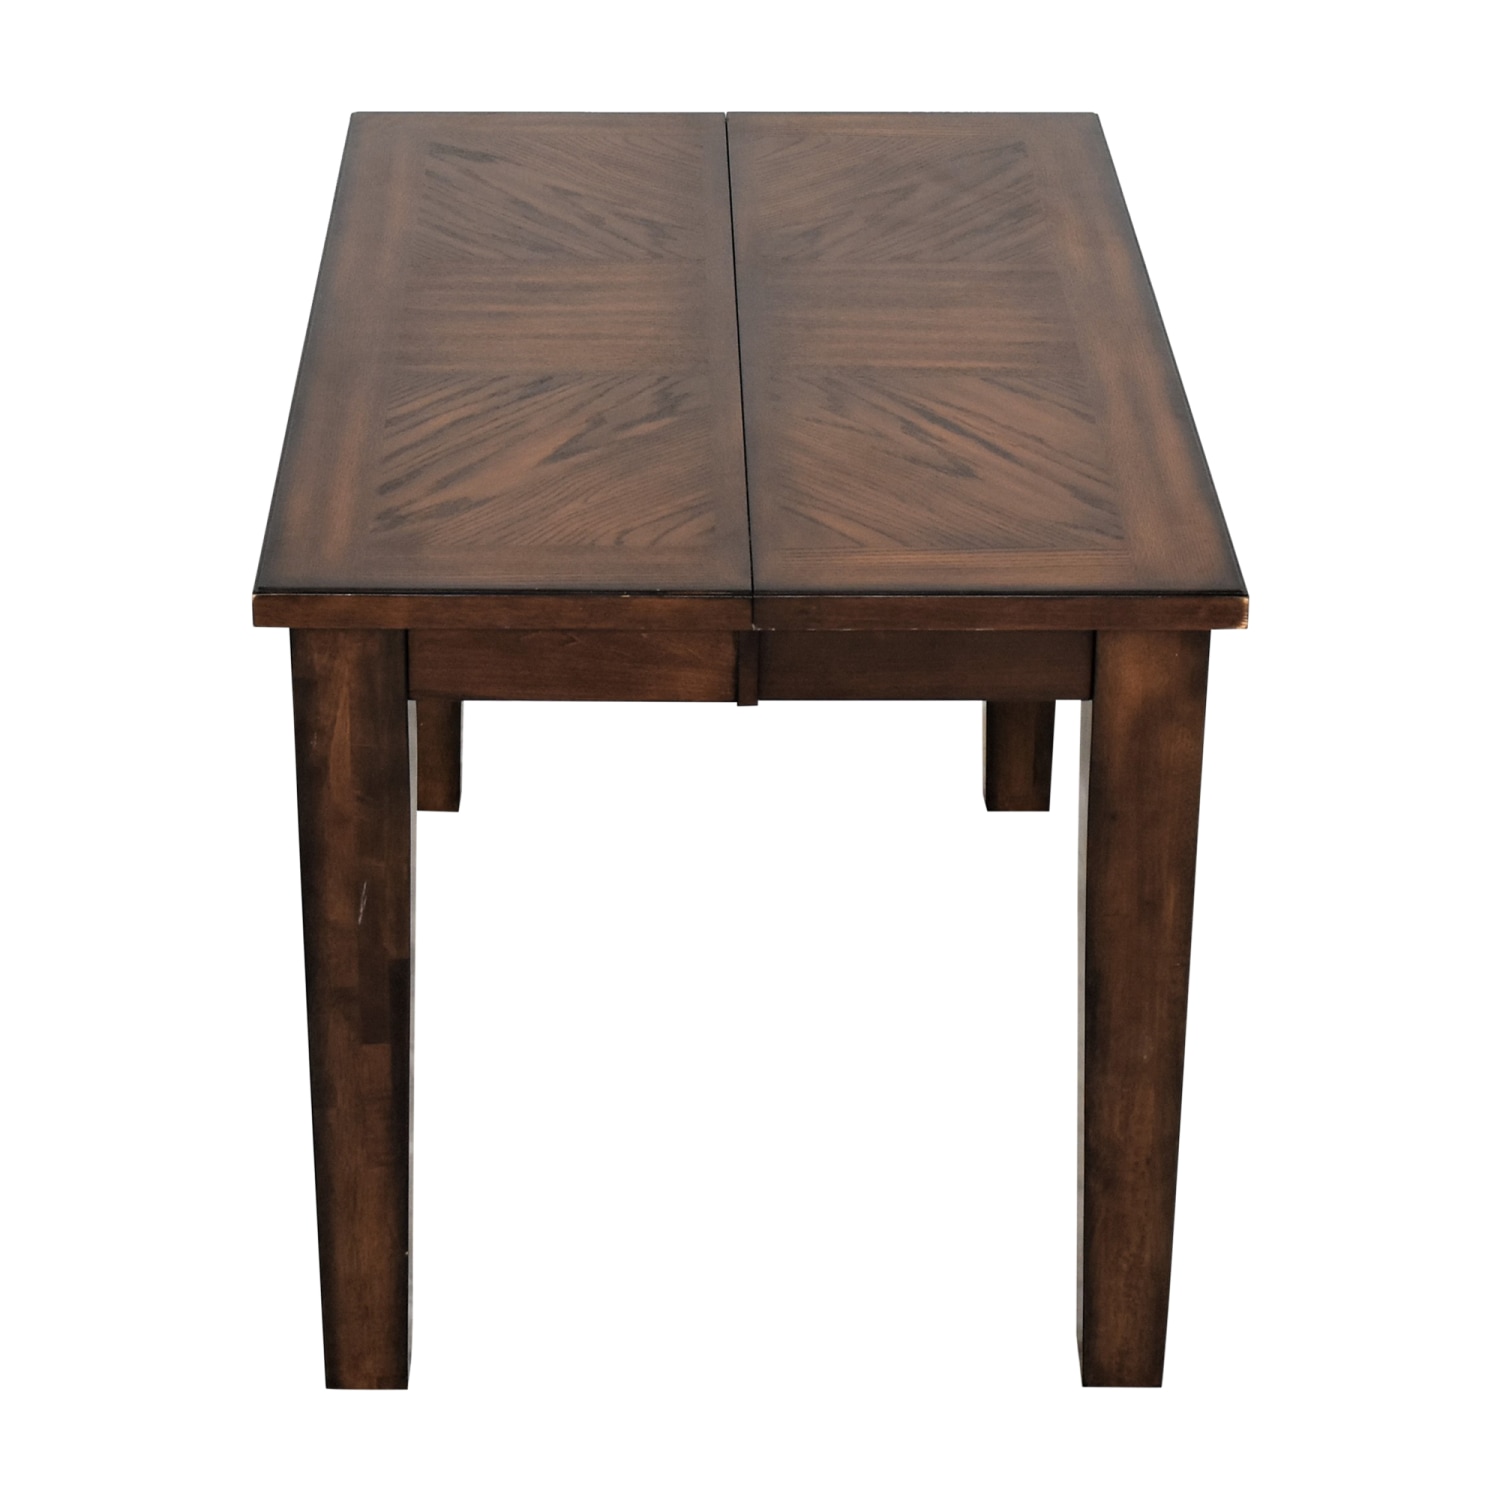 Buy wholesale Skraut Home - Extendable console dining table up to 301 cm in  dark oak color. Closed table measurements: 90 x 49 x 75 cm high